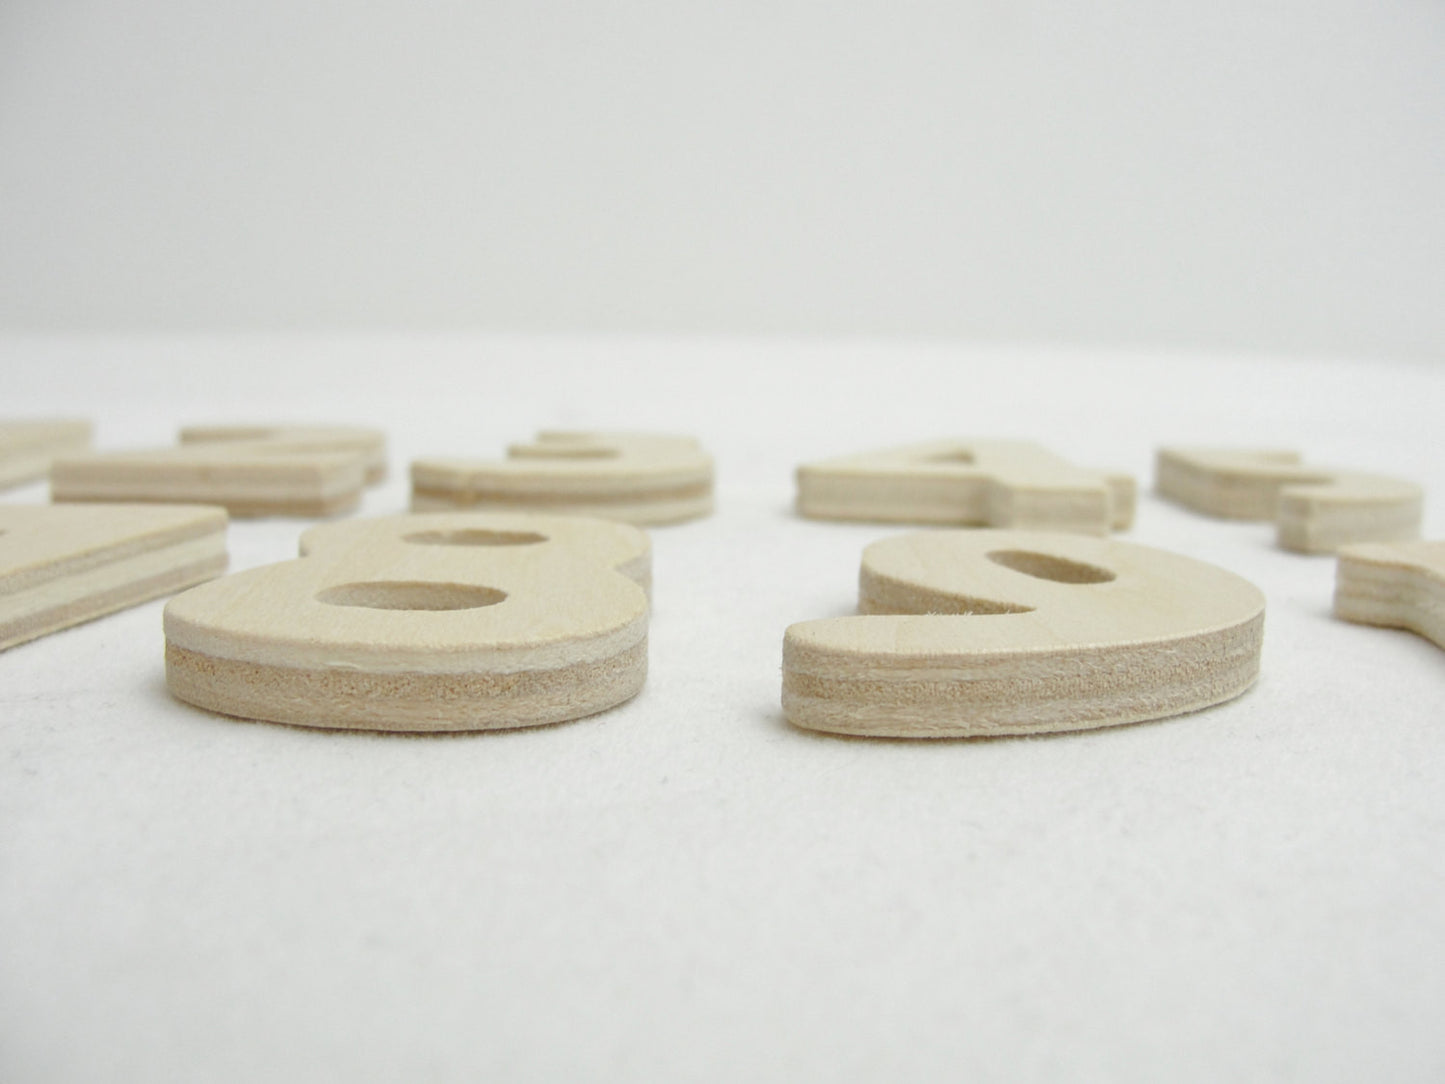 Wooden numbers 1 through 10, diy numbers 1 - 10, unfinished wooden numbers - Wood parts - Craft Supply House